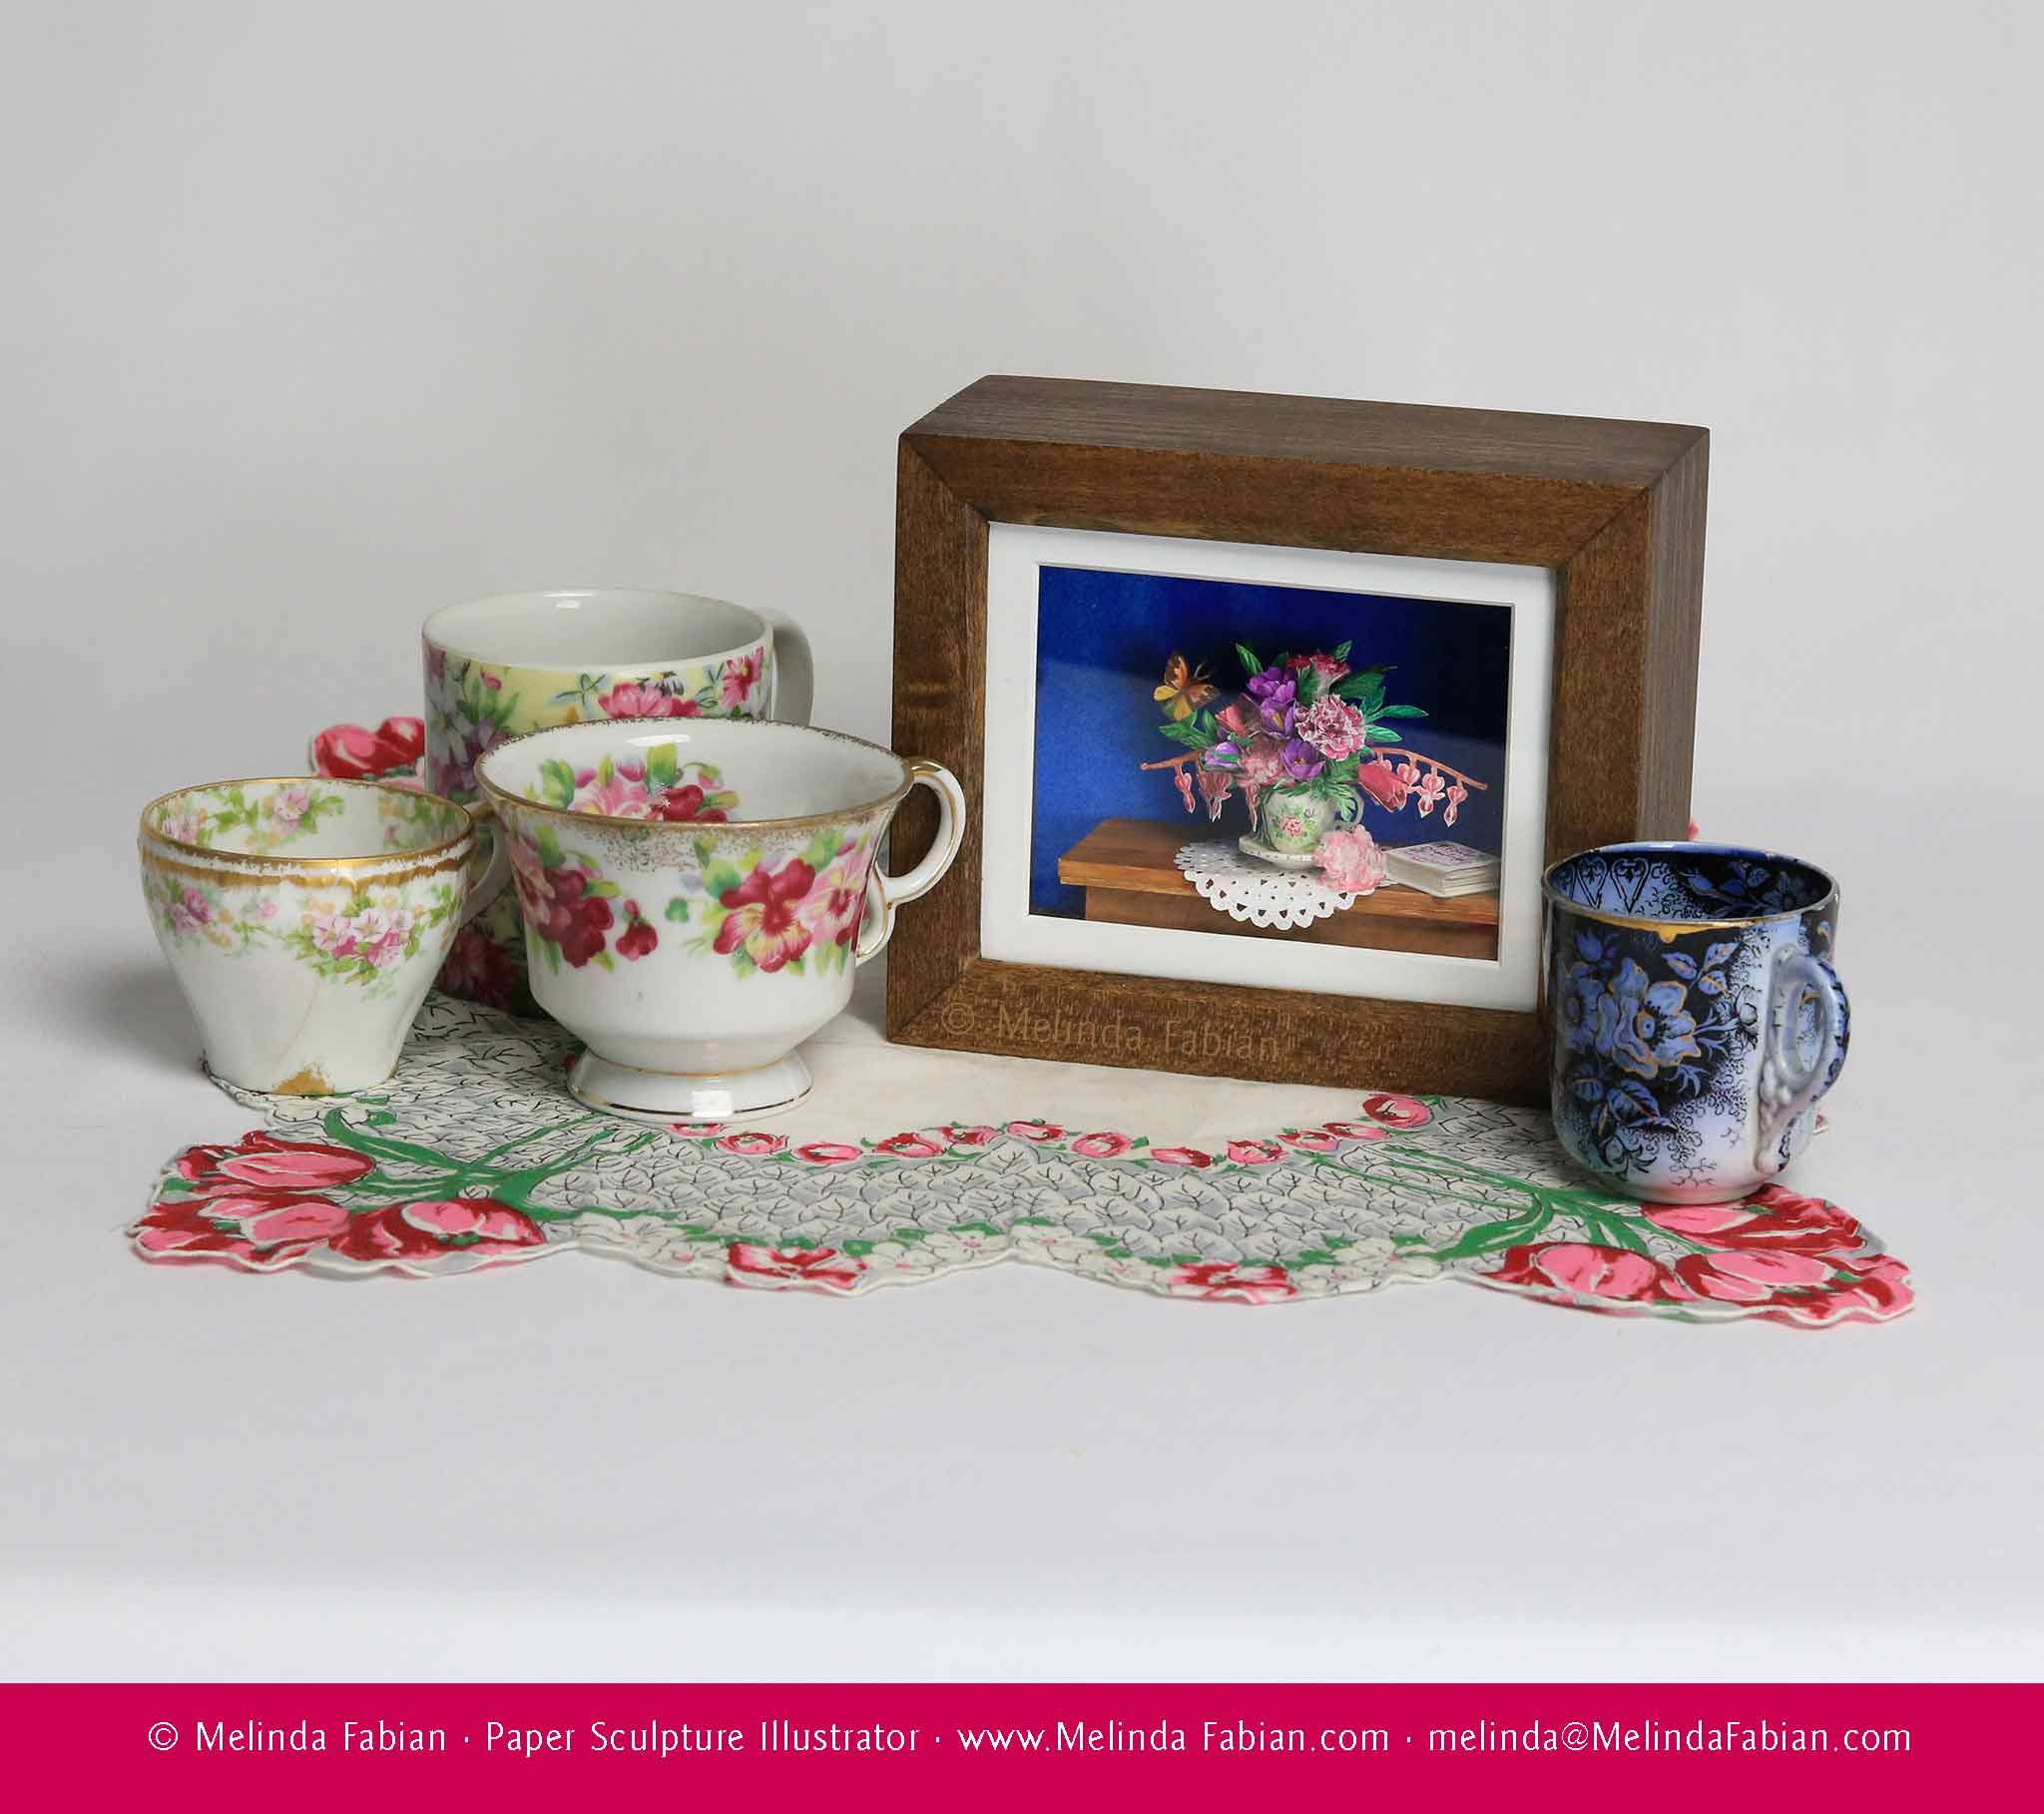 'Teacup in Spring' and Teacups